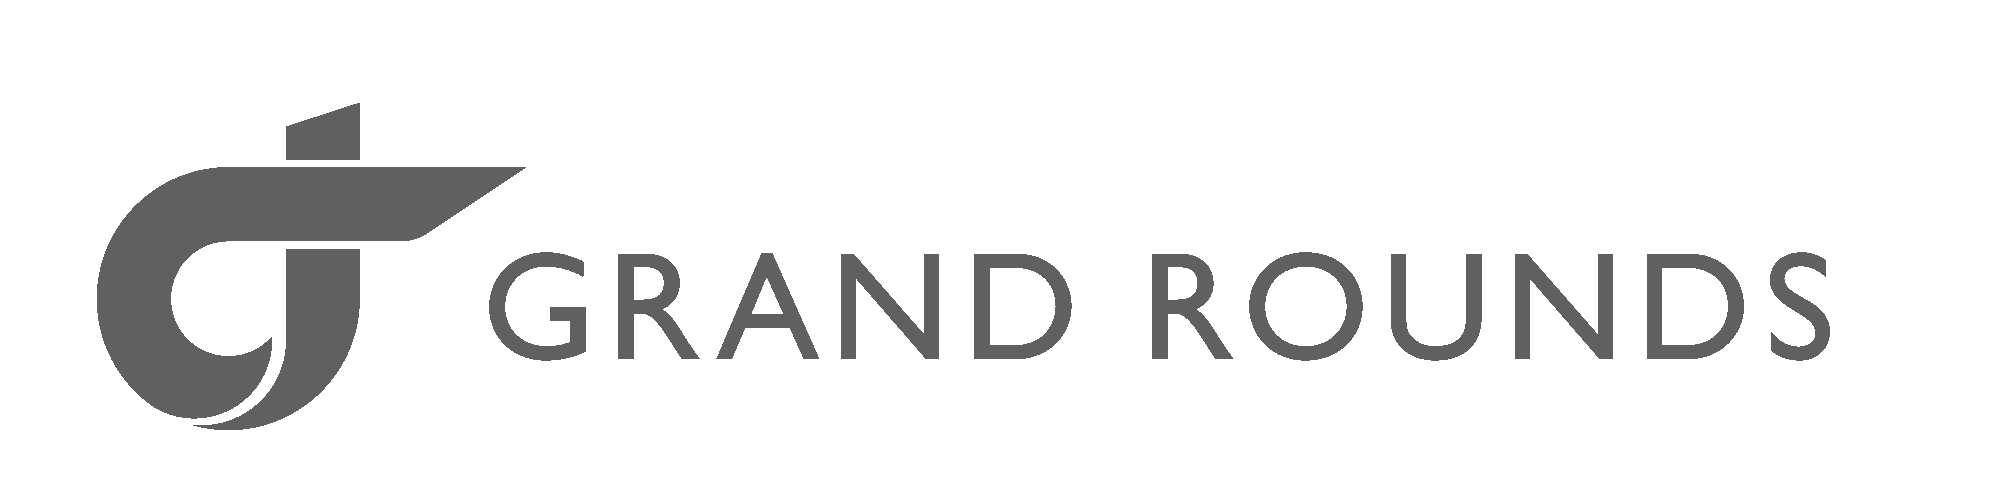 Grand-Rounds-Logo-Lockup-Horizontal-Outlined-2-Color copy.png